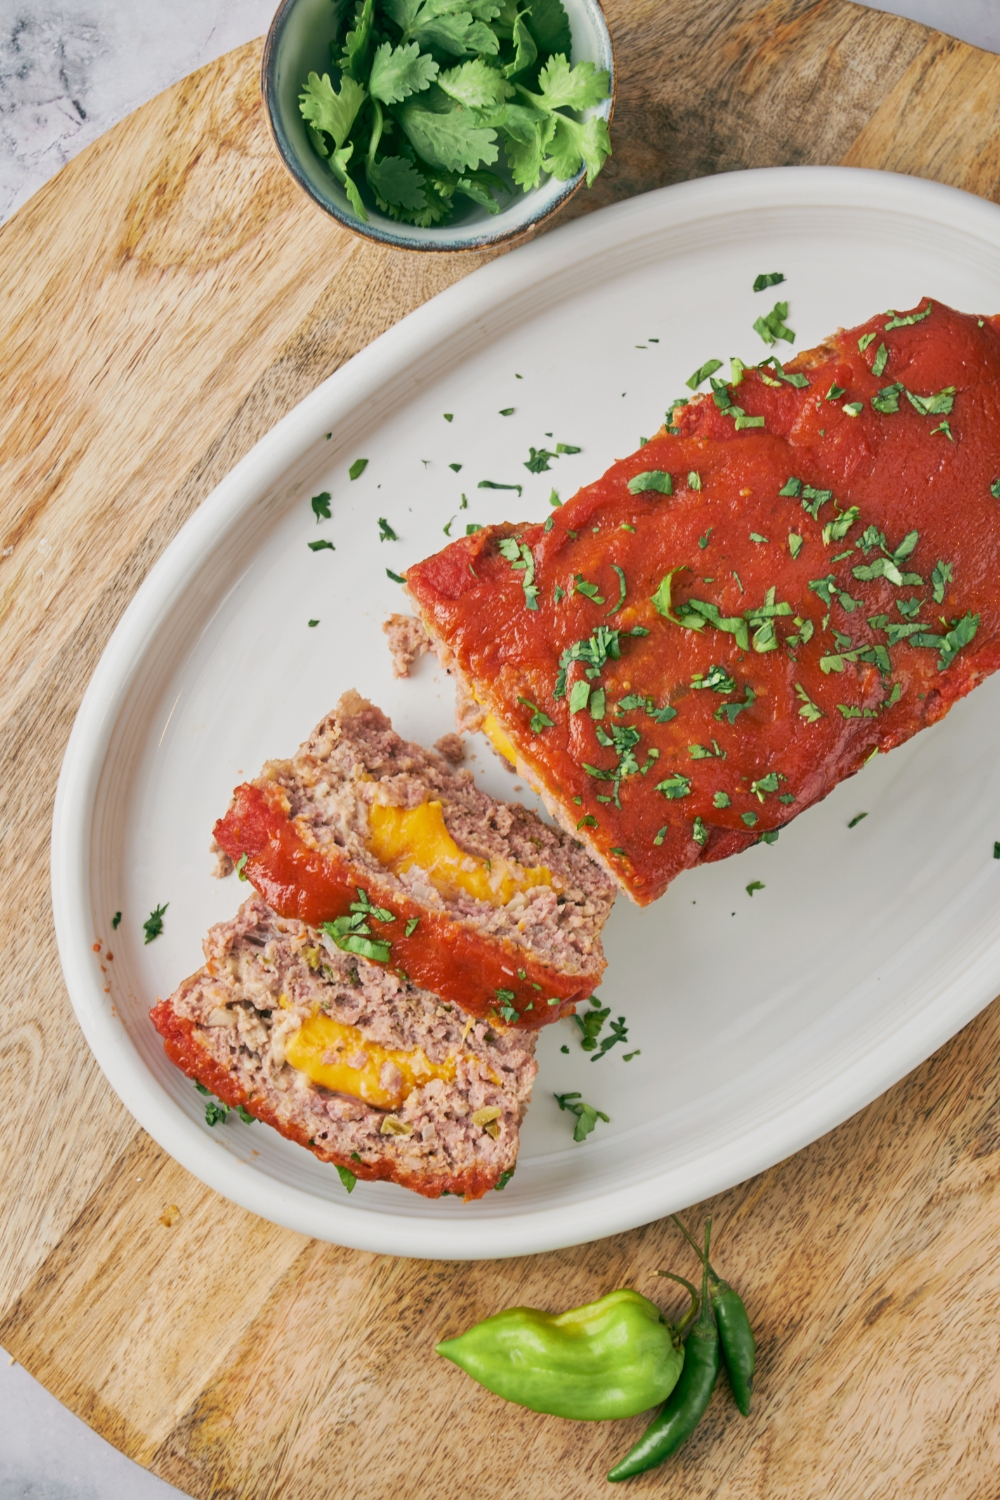 Meatloaf covered in red sauce with two slices cut and laid on top of each other. The meatloaf is filled with melted cheese.